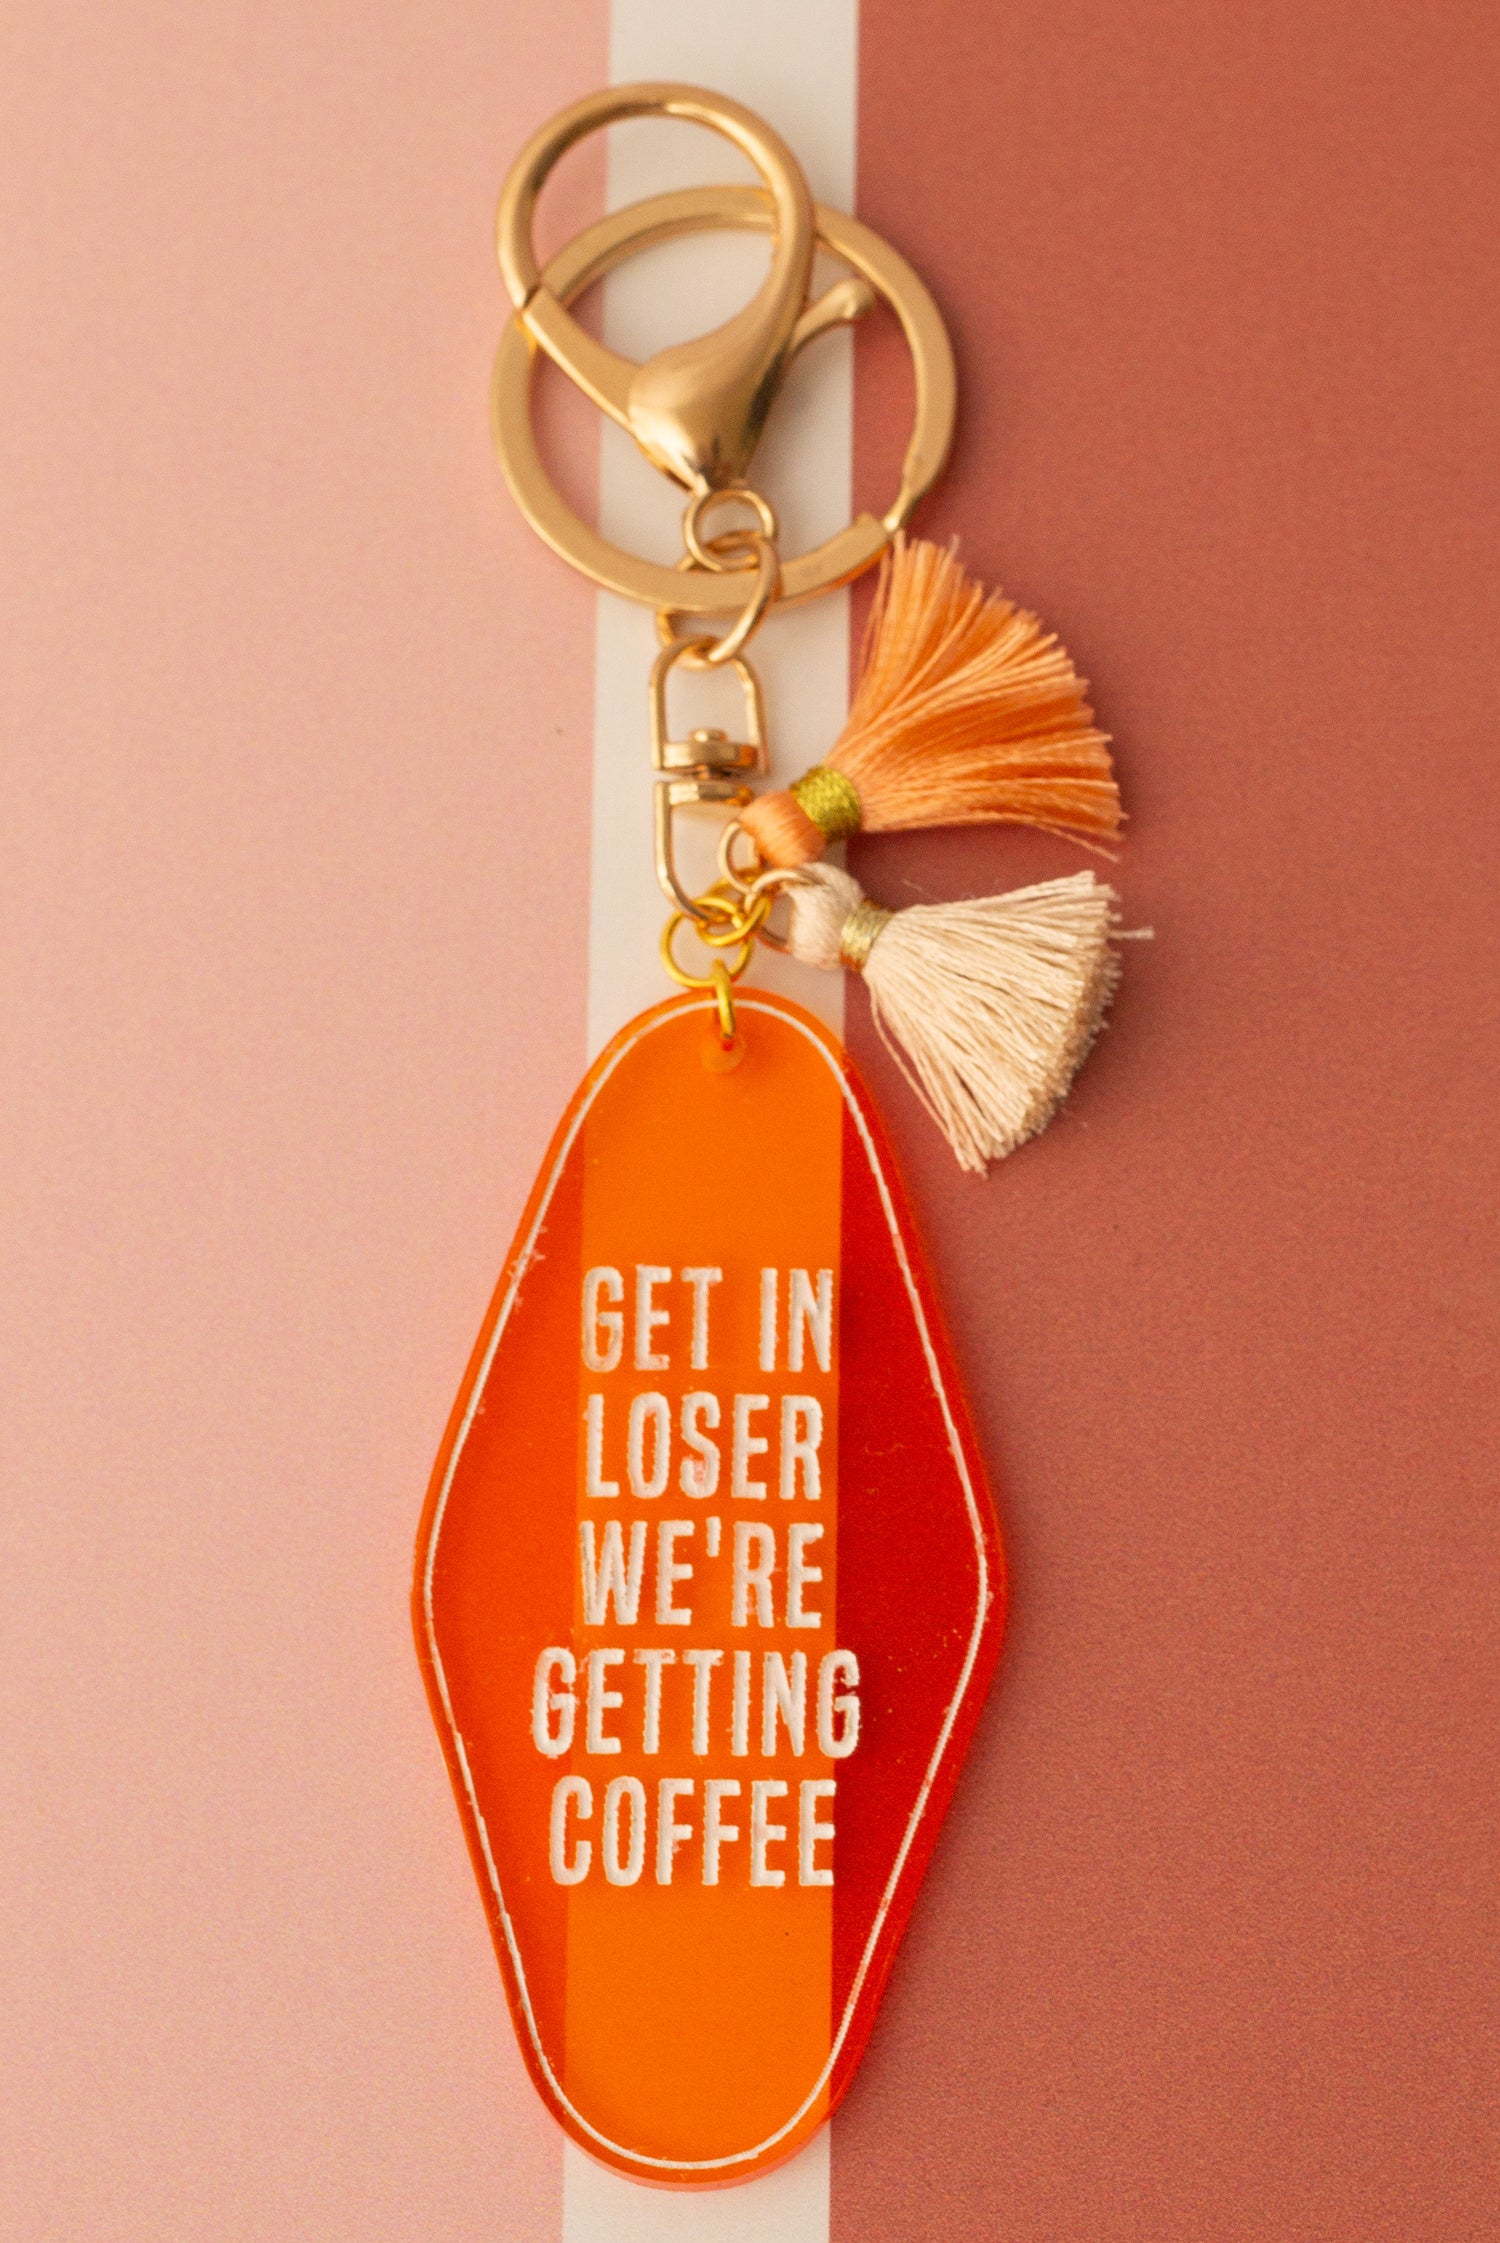 Get in Loser We're Getting Coffee - Vintage Style Acrylic Keychain